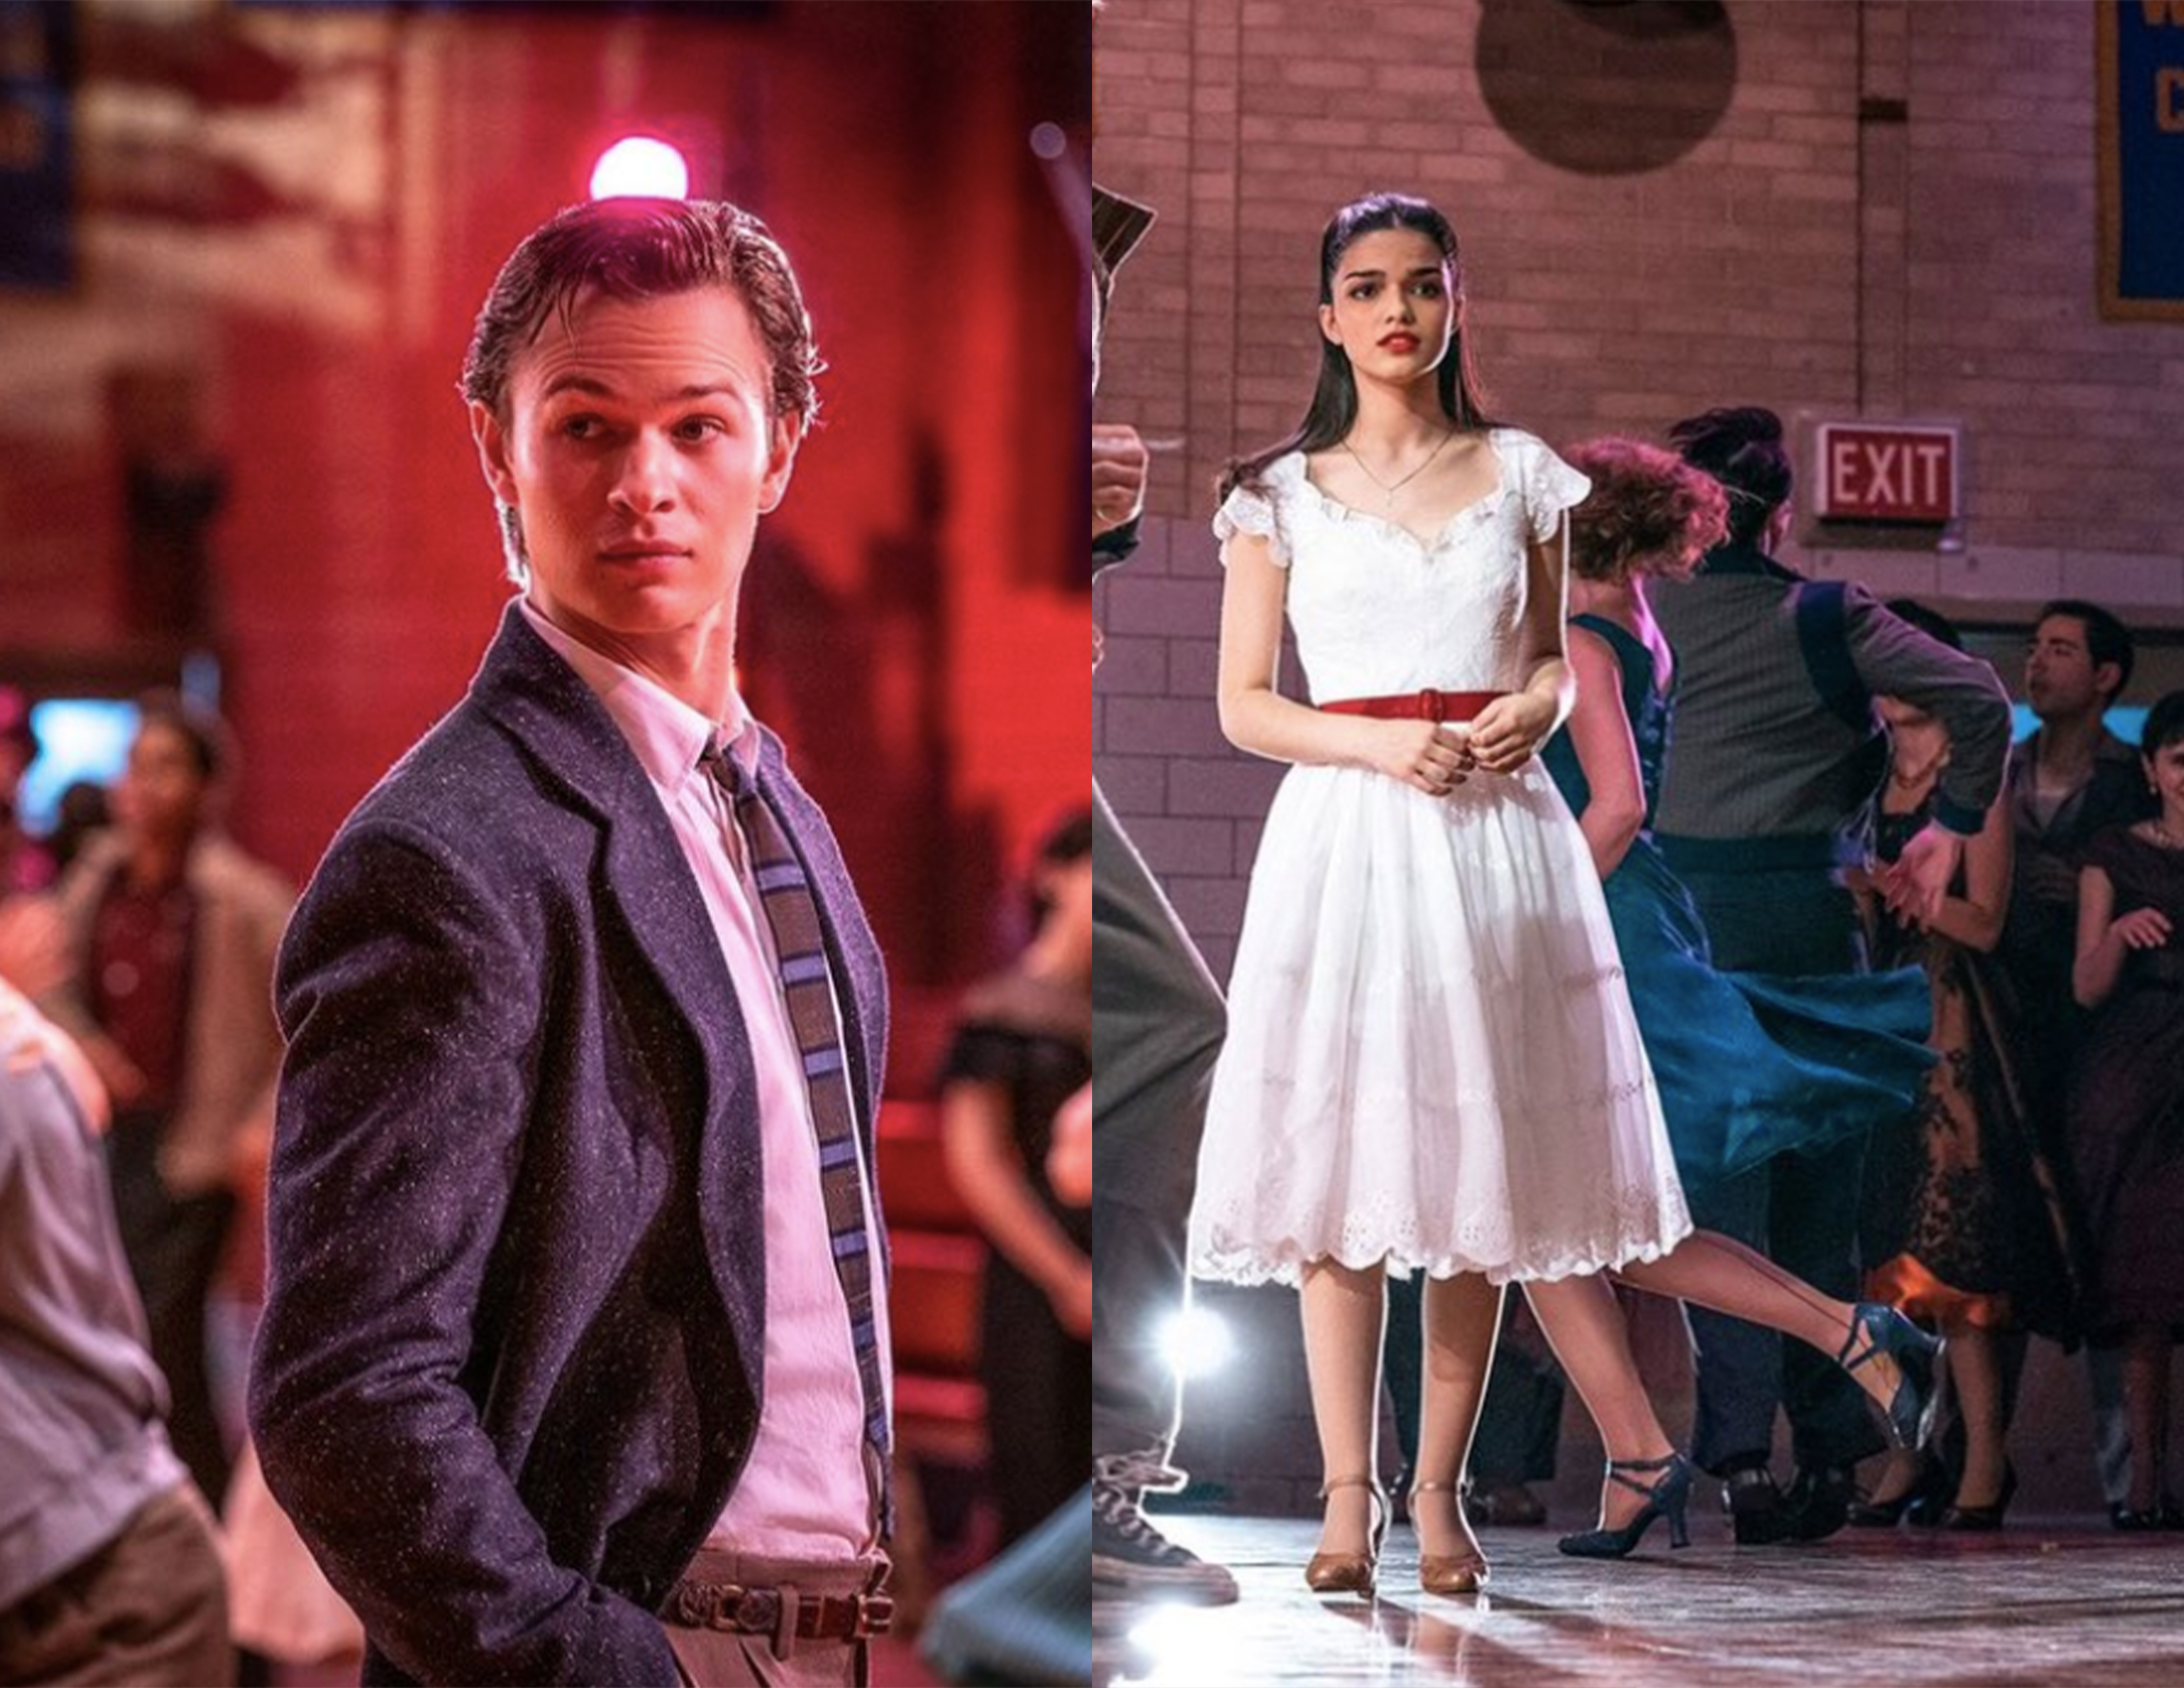 How Will Steven Spielberg’s Remake Of Classic West Side Story Fly With The New Generation?